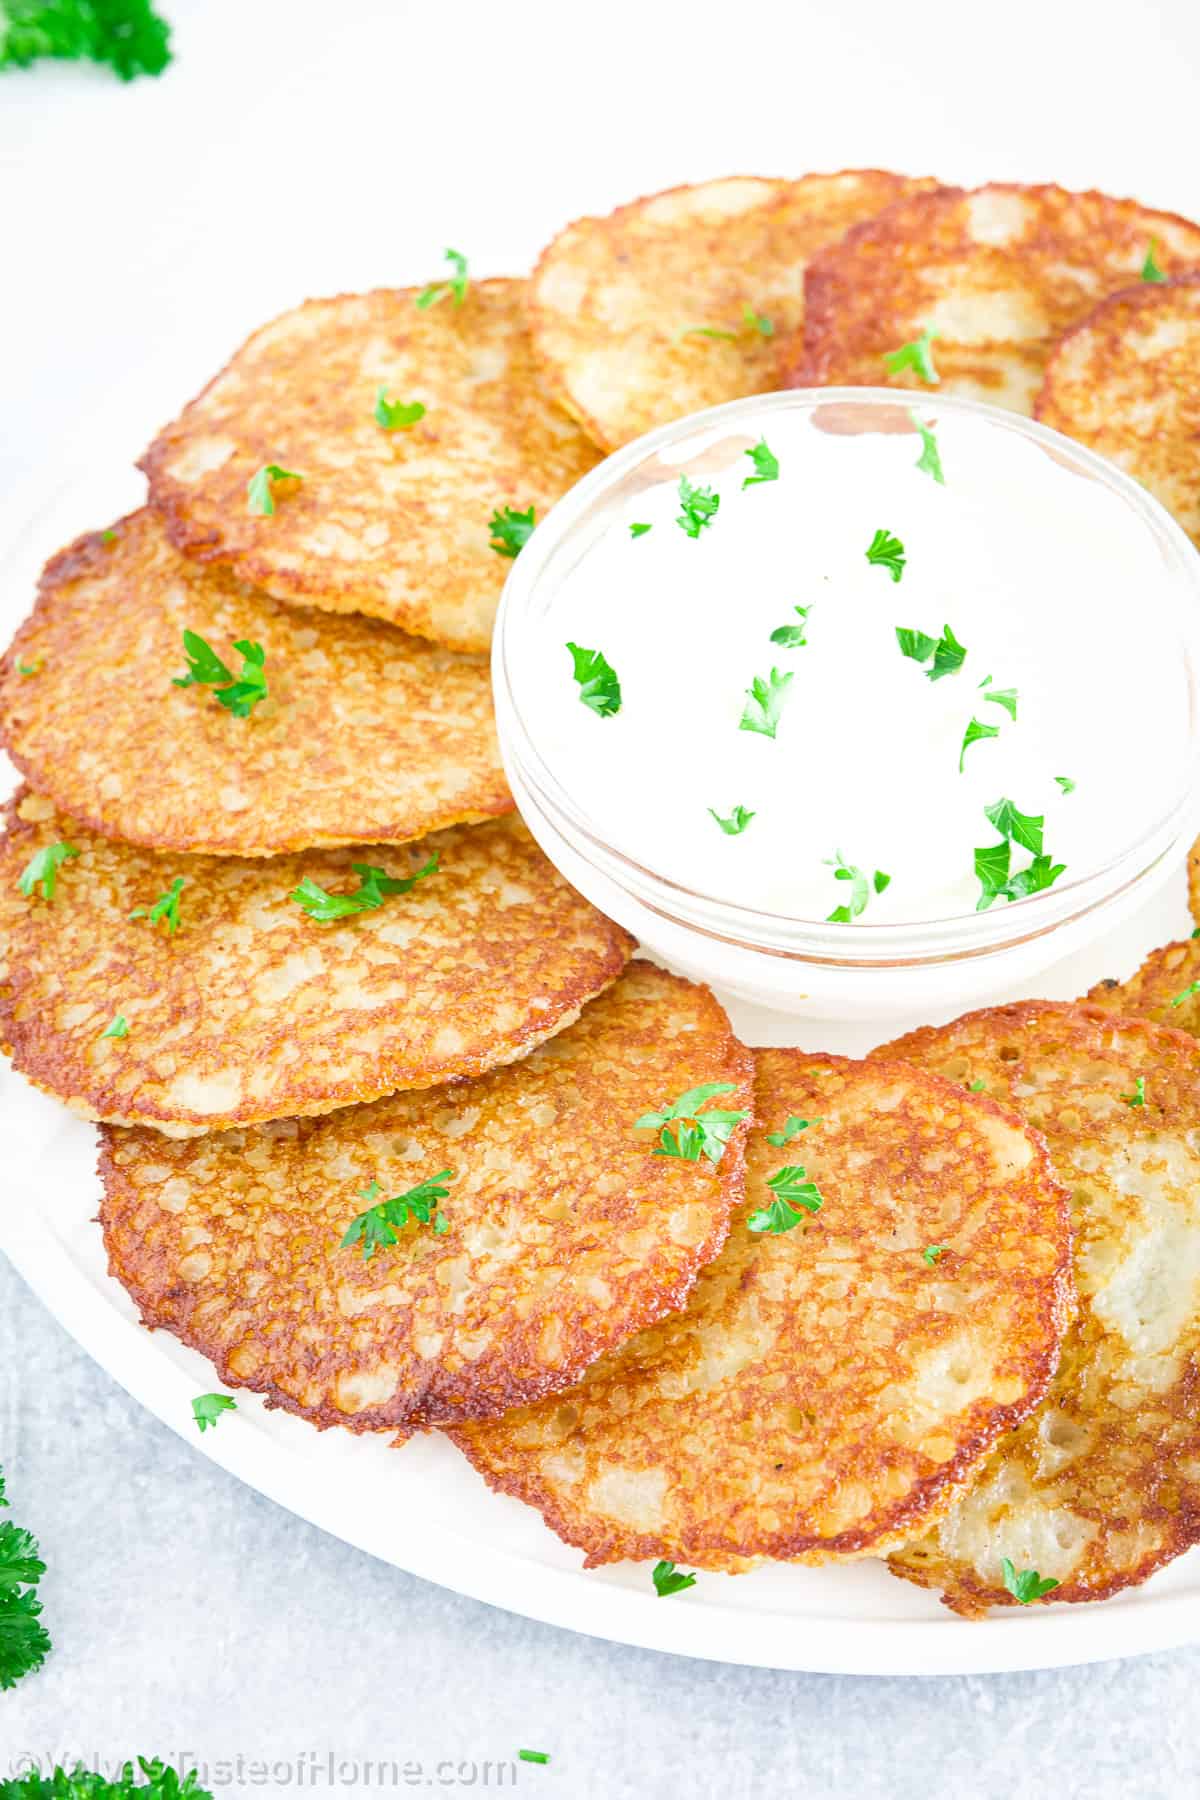 Whether served as a breakfast or as a side dish, these potato pancakes are sure to impress with their delicious taste and rustic charm. 